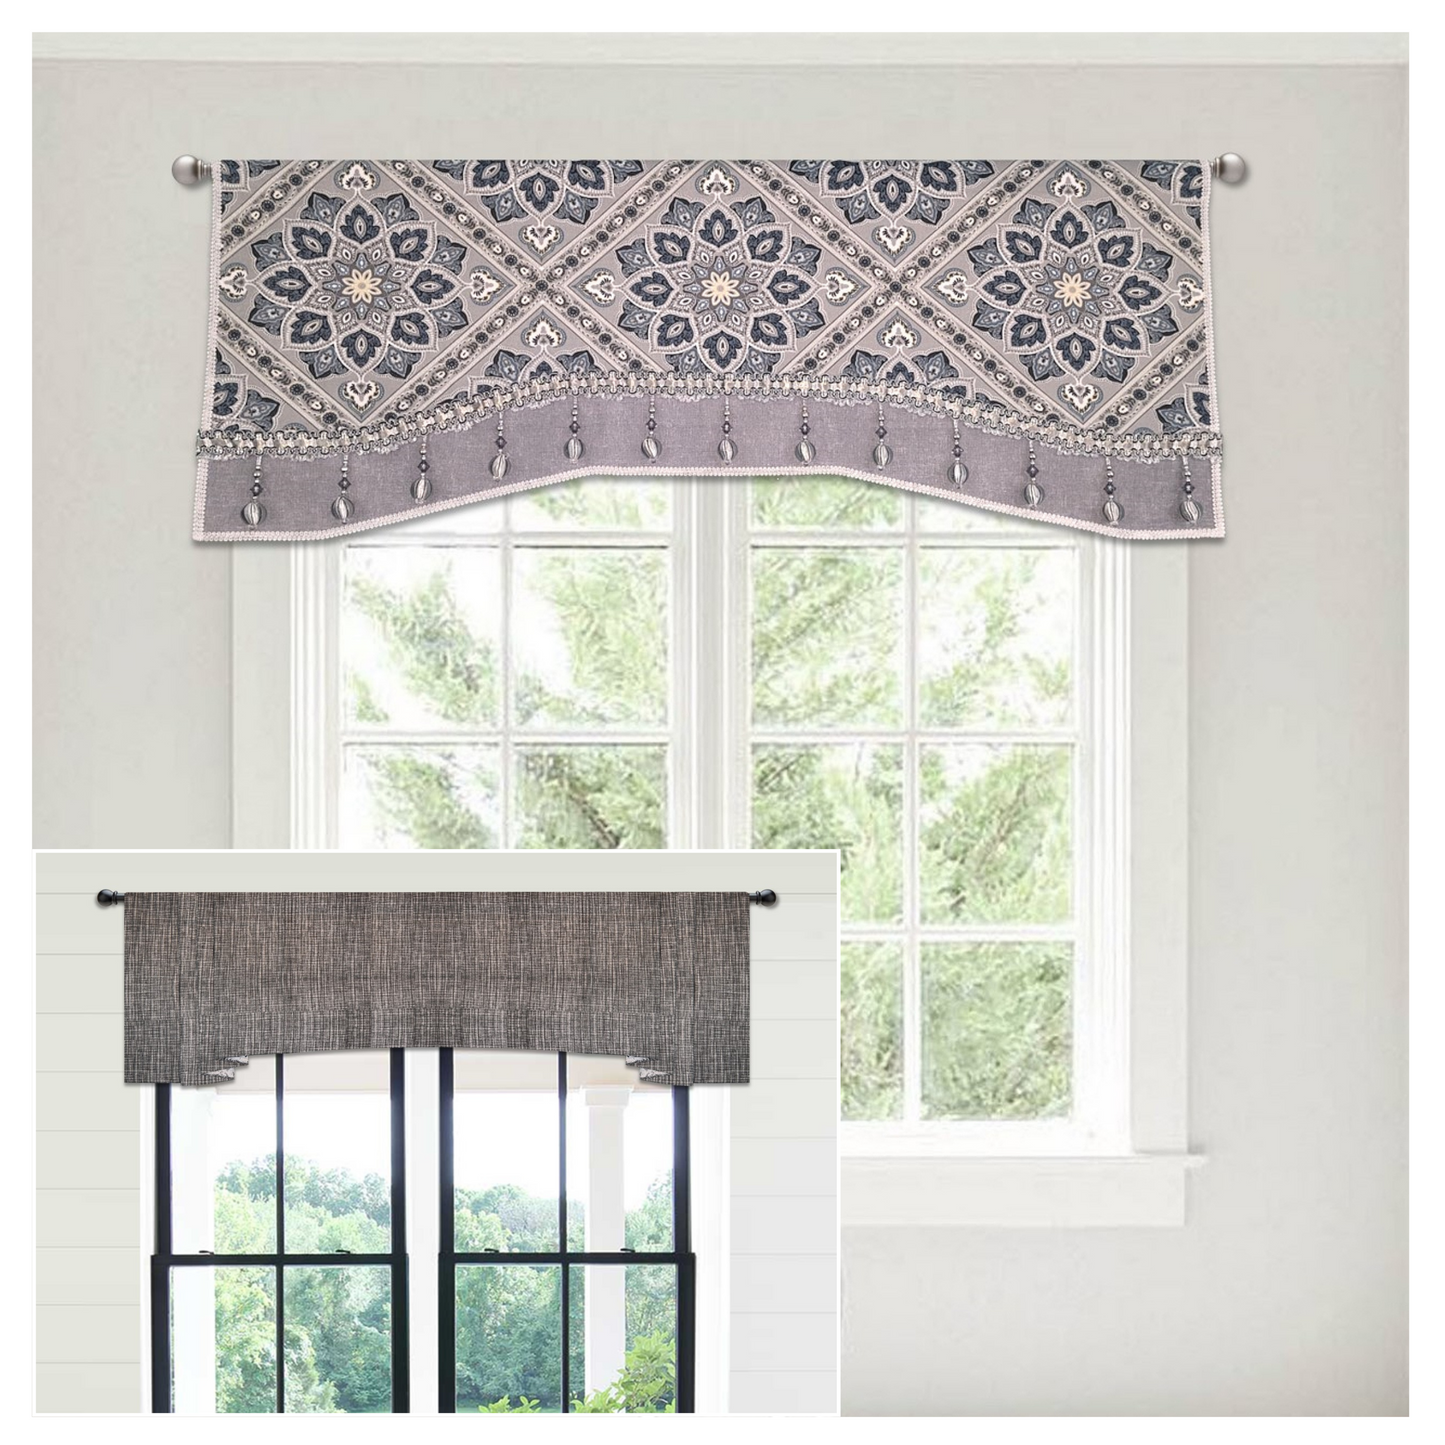 Traceable Designer No-Sew Curtain Valance Kit. Reusable Traceable Valance Design Form for Making Pleated, Gathered, and Cornice Valance Styles Without Sewing! Fit All Window Sizes. Use a 1" curtain Rod.